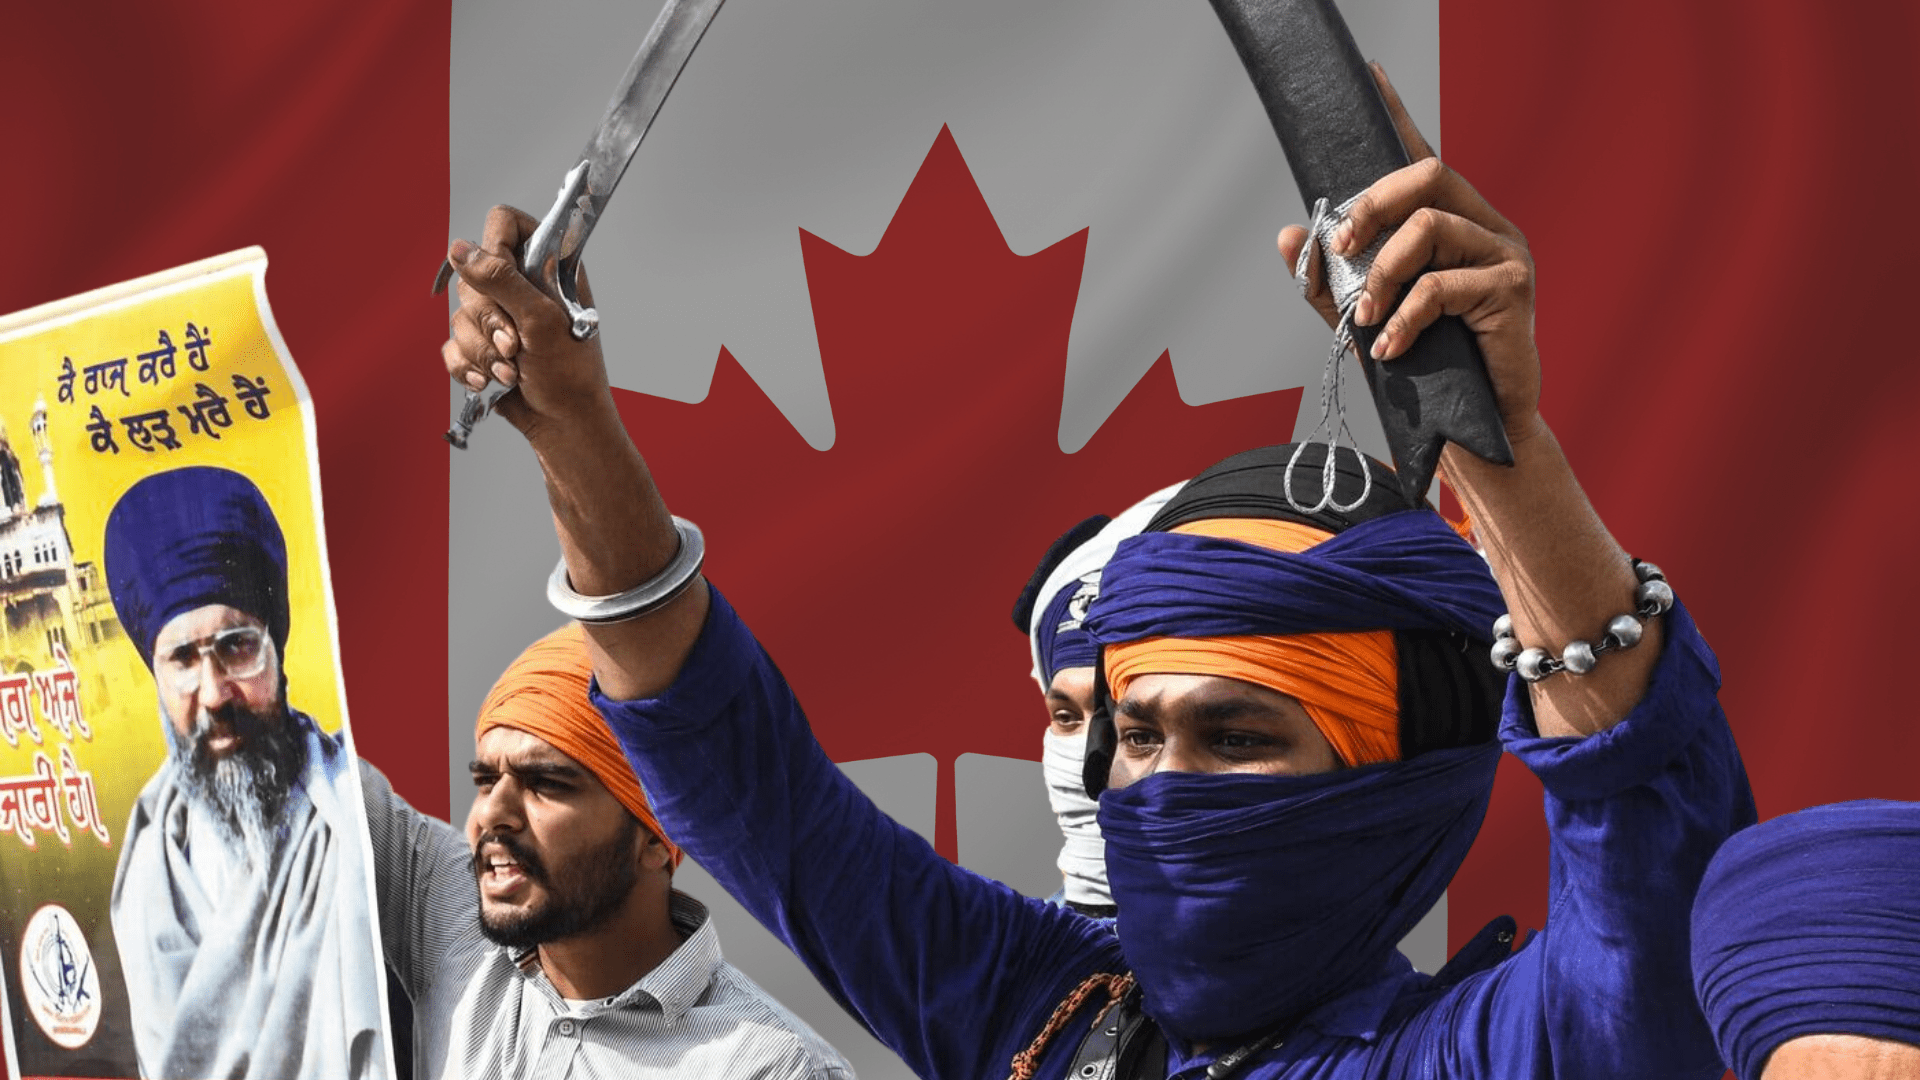 Khalistani extremists leading the anti-India and anti-Hindu charge in Canada